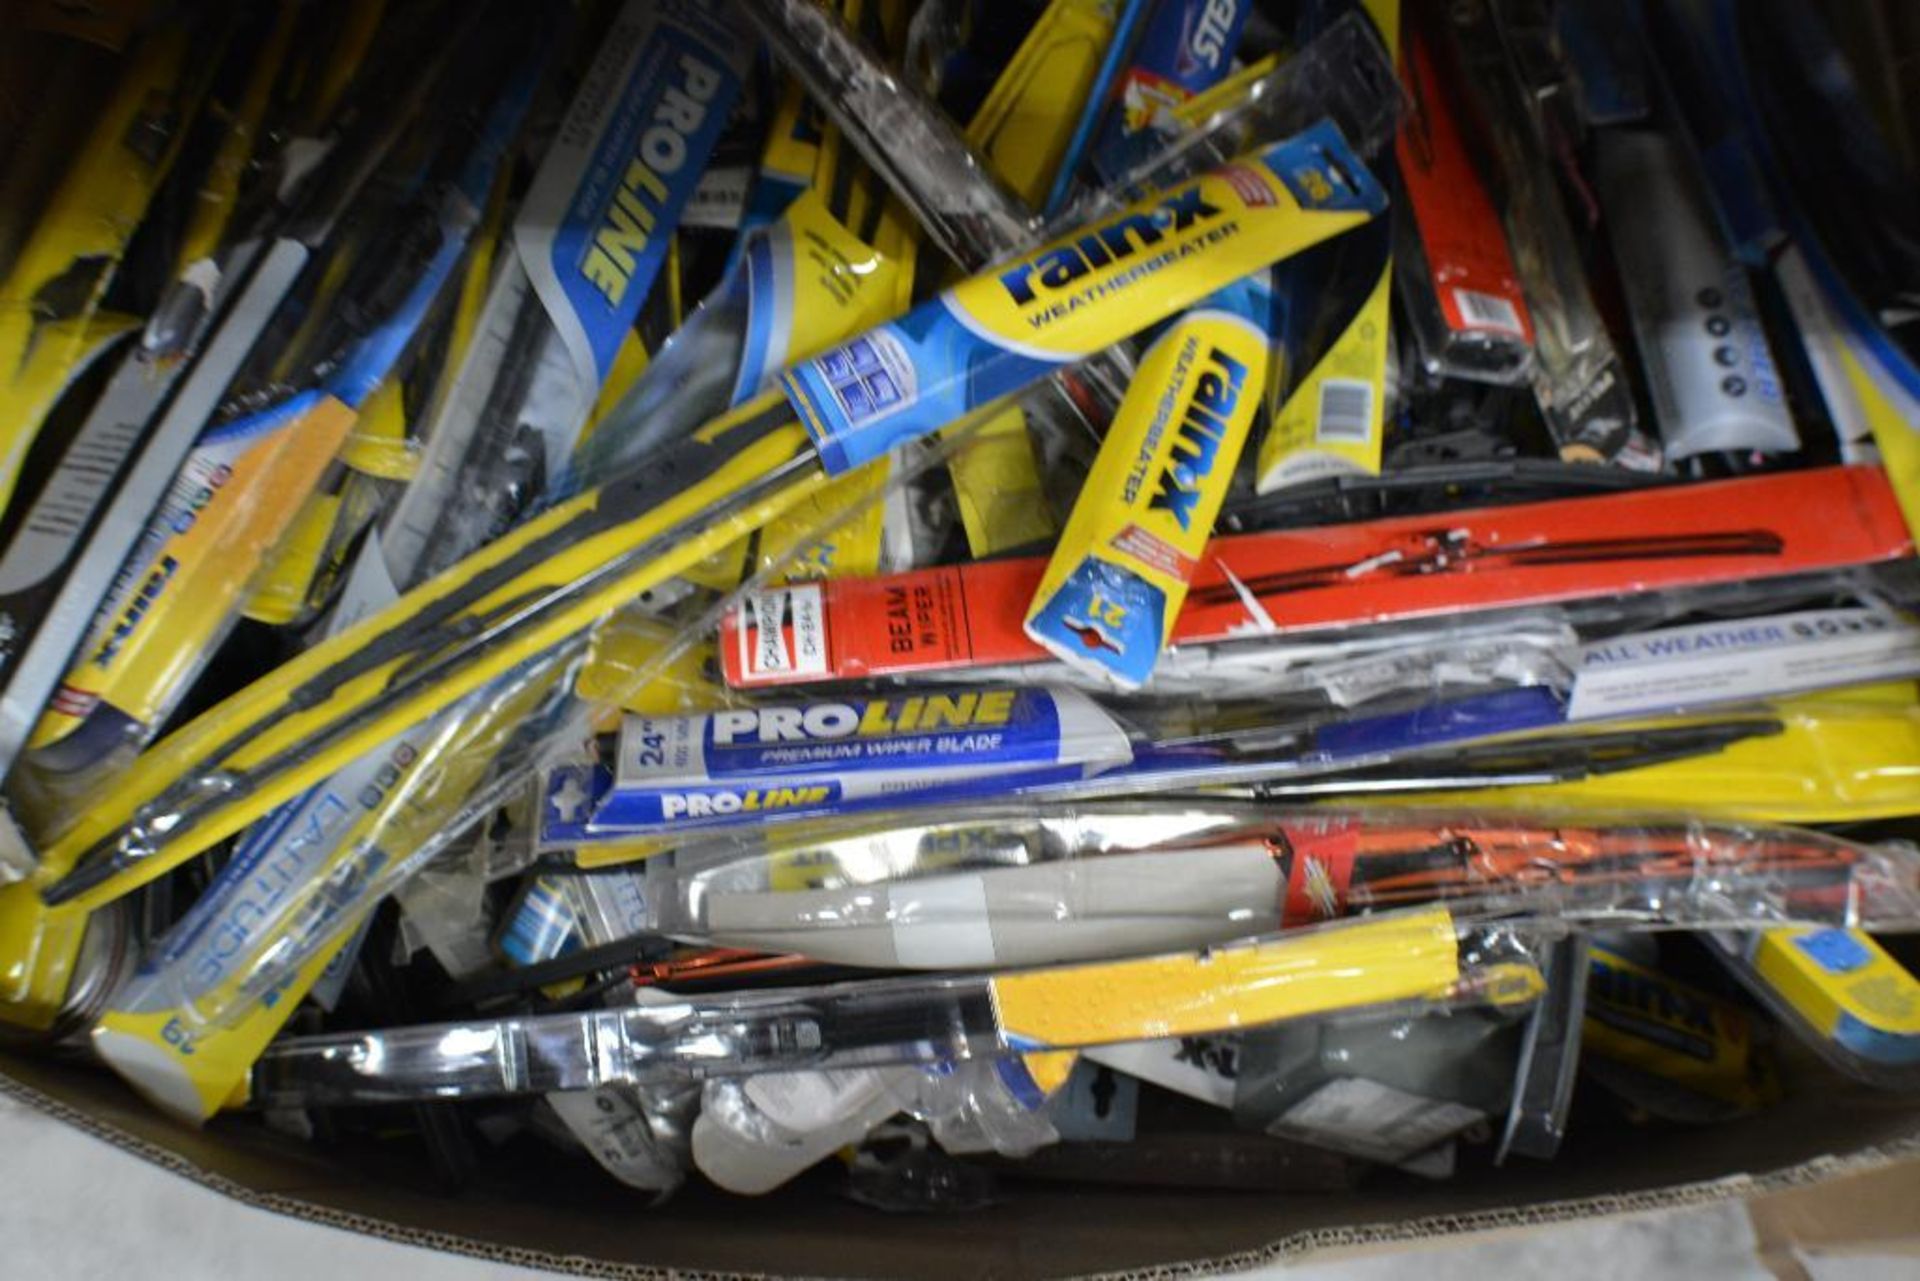 Windshield Wipers. Assorted Sizes and Brands. Contents of Gaylord - Image 3 of 4